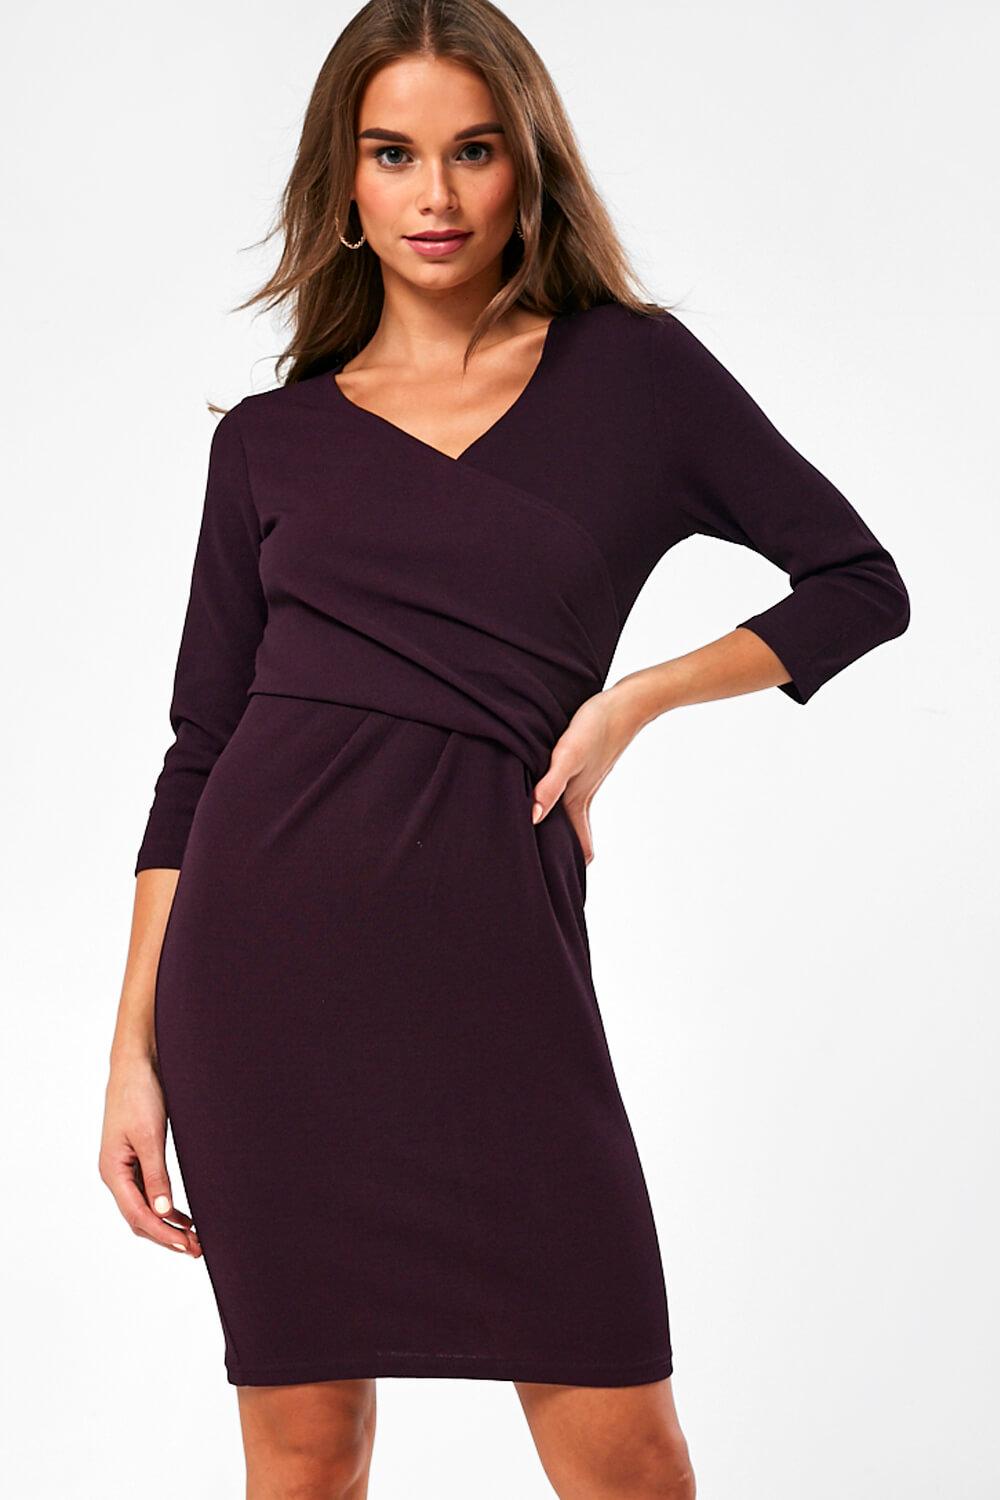 B.Young Rutina Crossover Dress in Plum | iCLOTHING - iCLOTHING